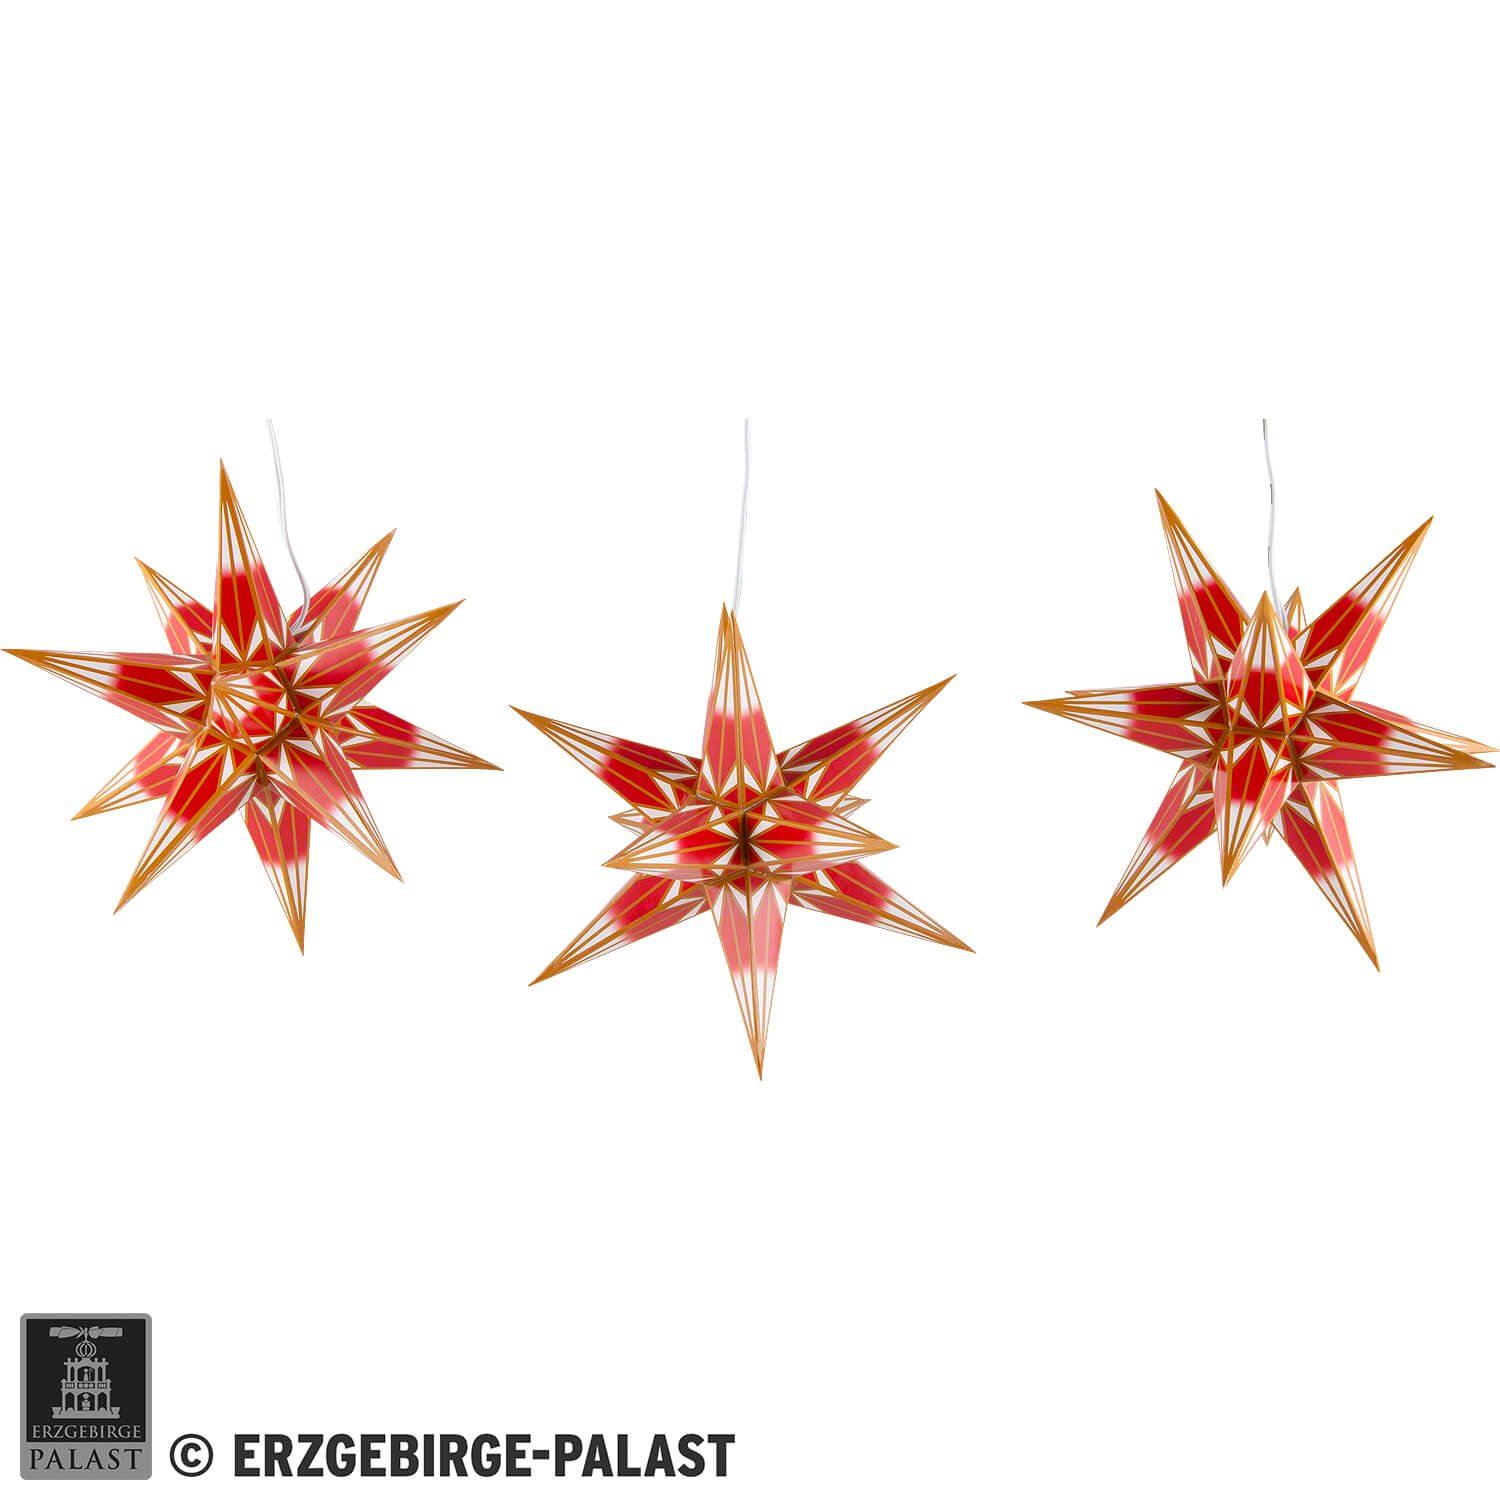 Hasslau Christmas Star Set of Three for Inside Use Red/White with ...